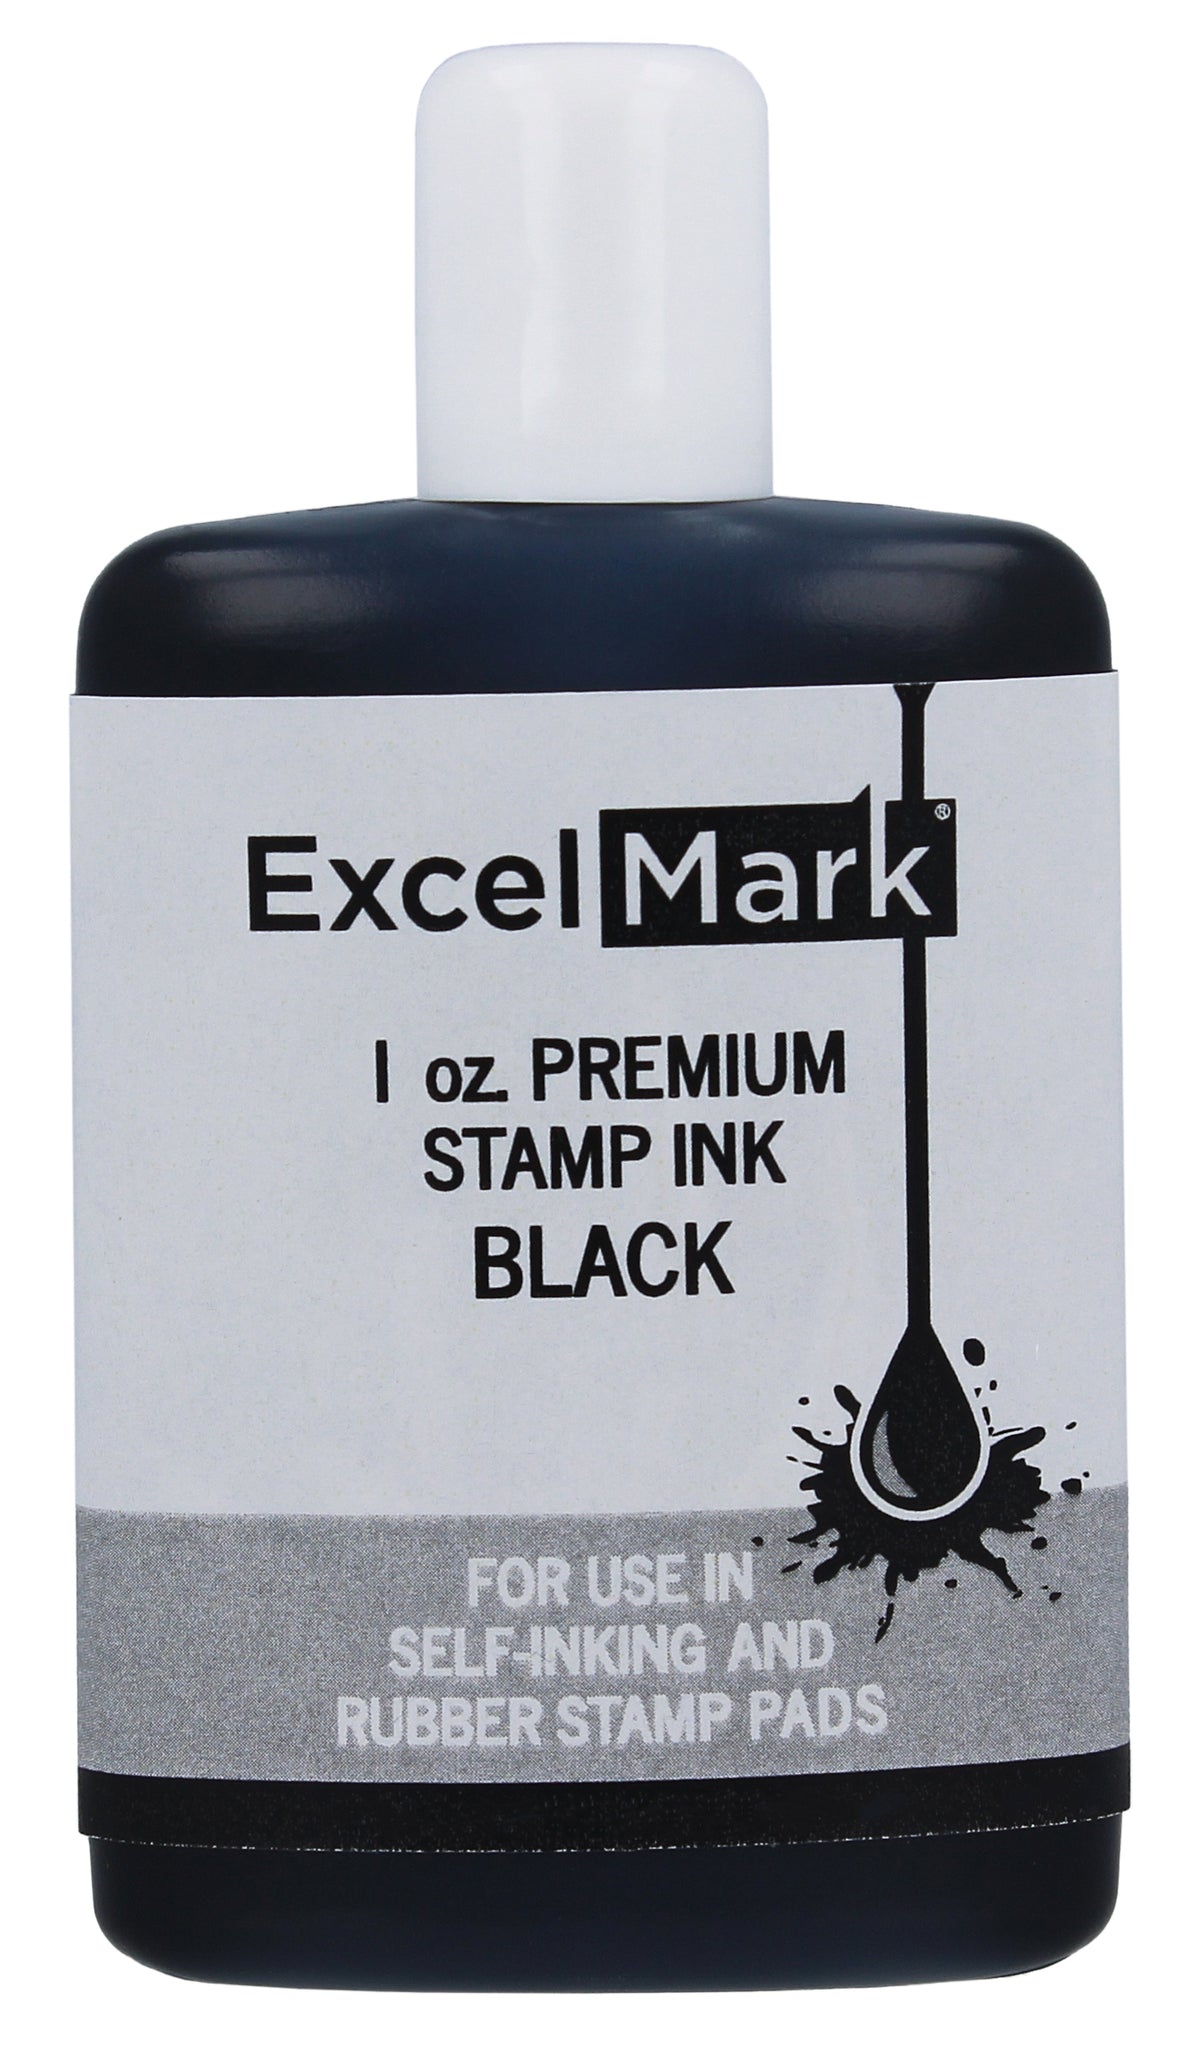 Offistamp Pre-Inked Stamp, Ink Refill - China Refill Ink, Ink